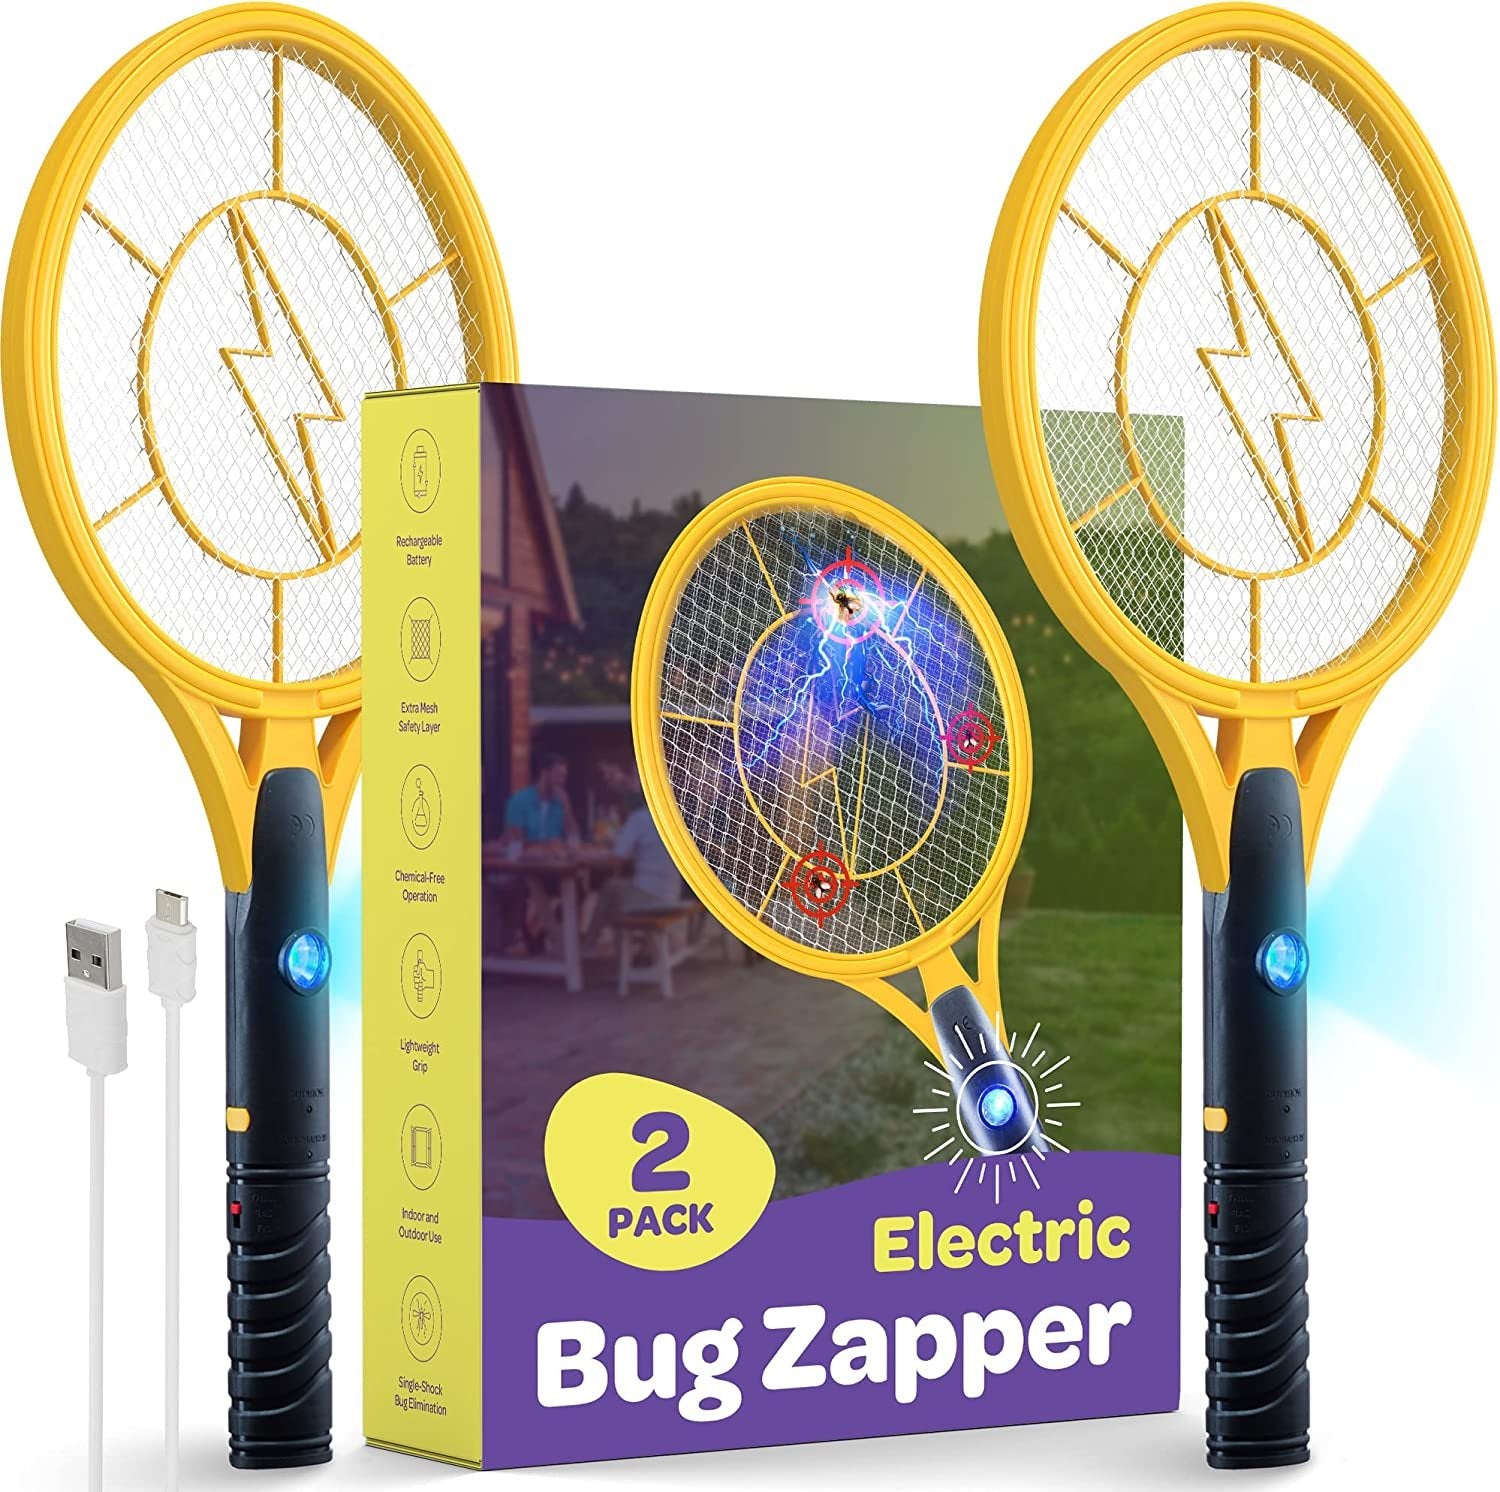 Electric Fly Swatter [Set of 2] Handheld Bug Zapper Racket for Indoor/Outdoor - 4000 Volt Fly Swatter - Instant Bug & Mosquito Killer with Attractant LED Light - USB Rechargeable Portable Fly Zapper.